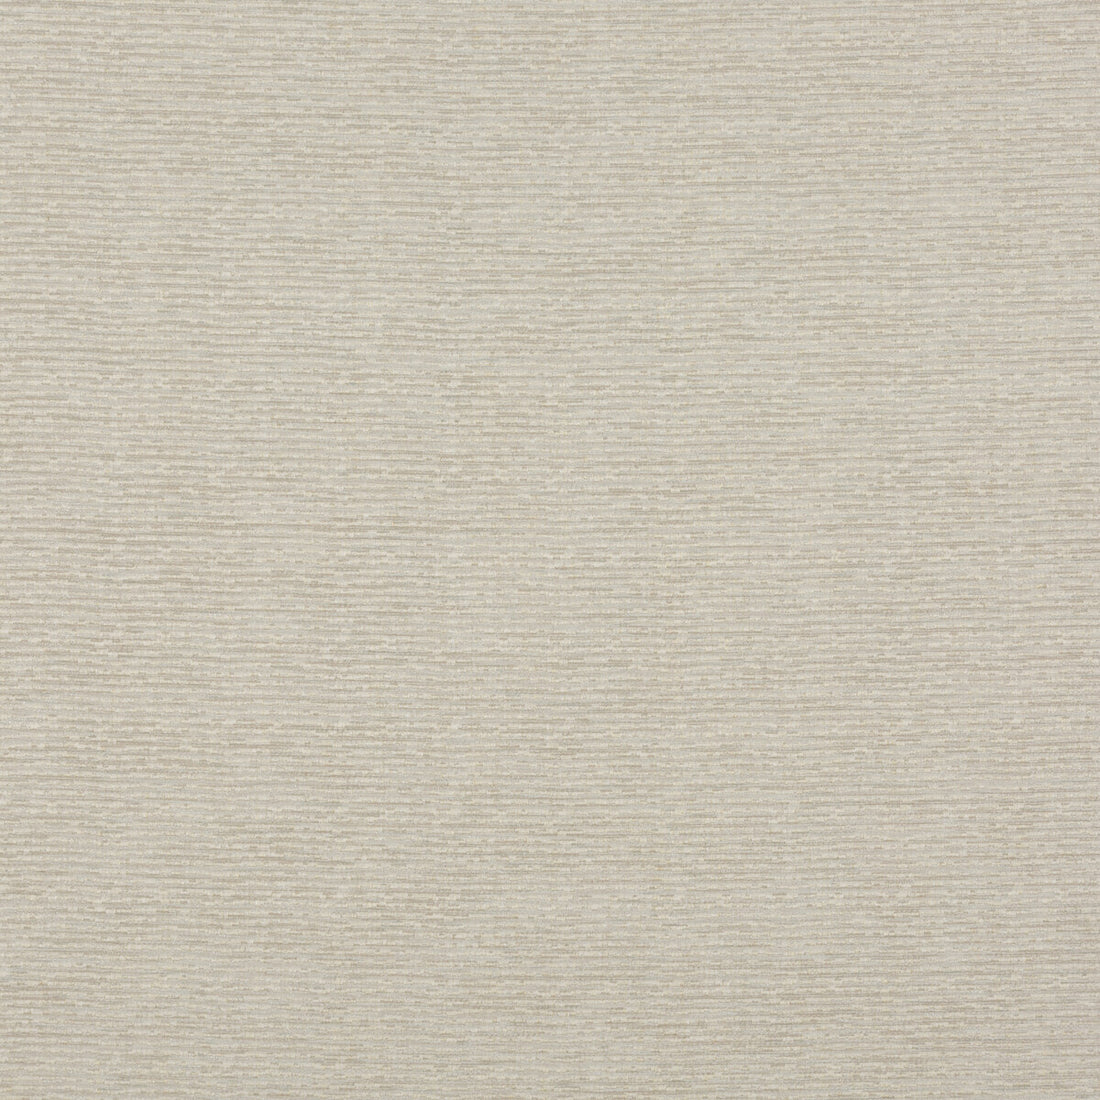 Esker fabric in marble color - pattern BF10685.106.0 - by G P &amp; J Baker in the Essential Colours collection